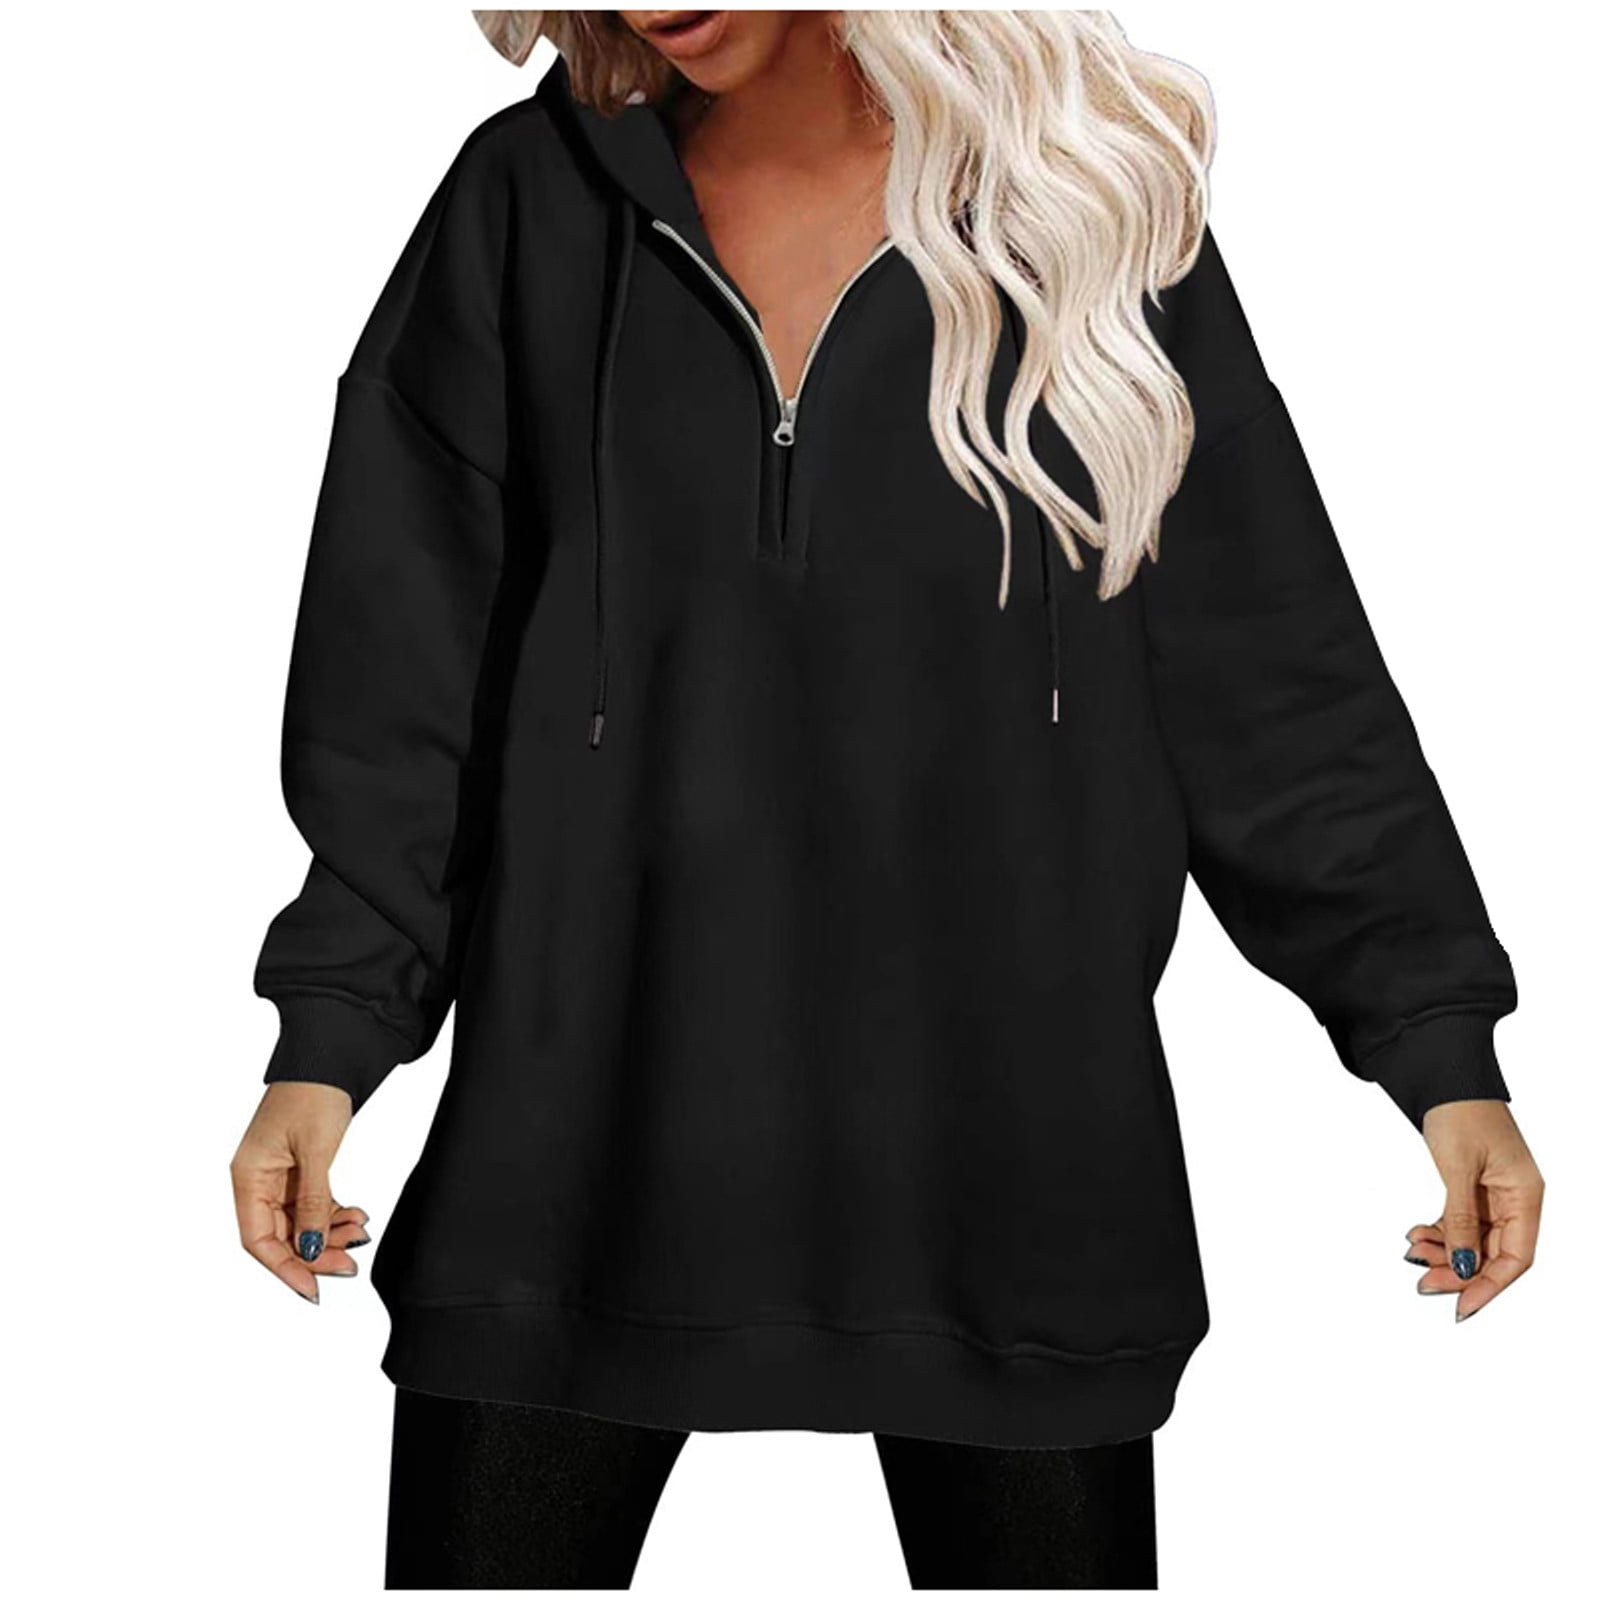 Holiday Deals yievot Oversized Hoodies for Women Half Zip Sweatshirts  Pullover Workout Hooded Tops Lightweight Casual Comfy Fall Fashion Outfits  On Clearance 